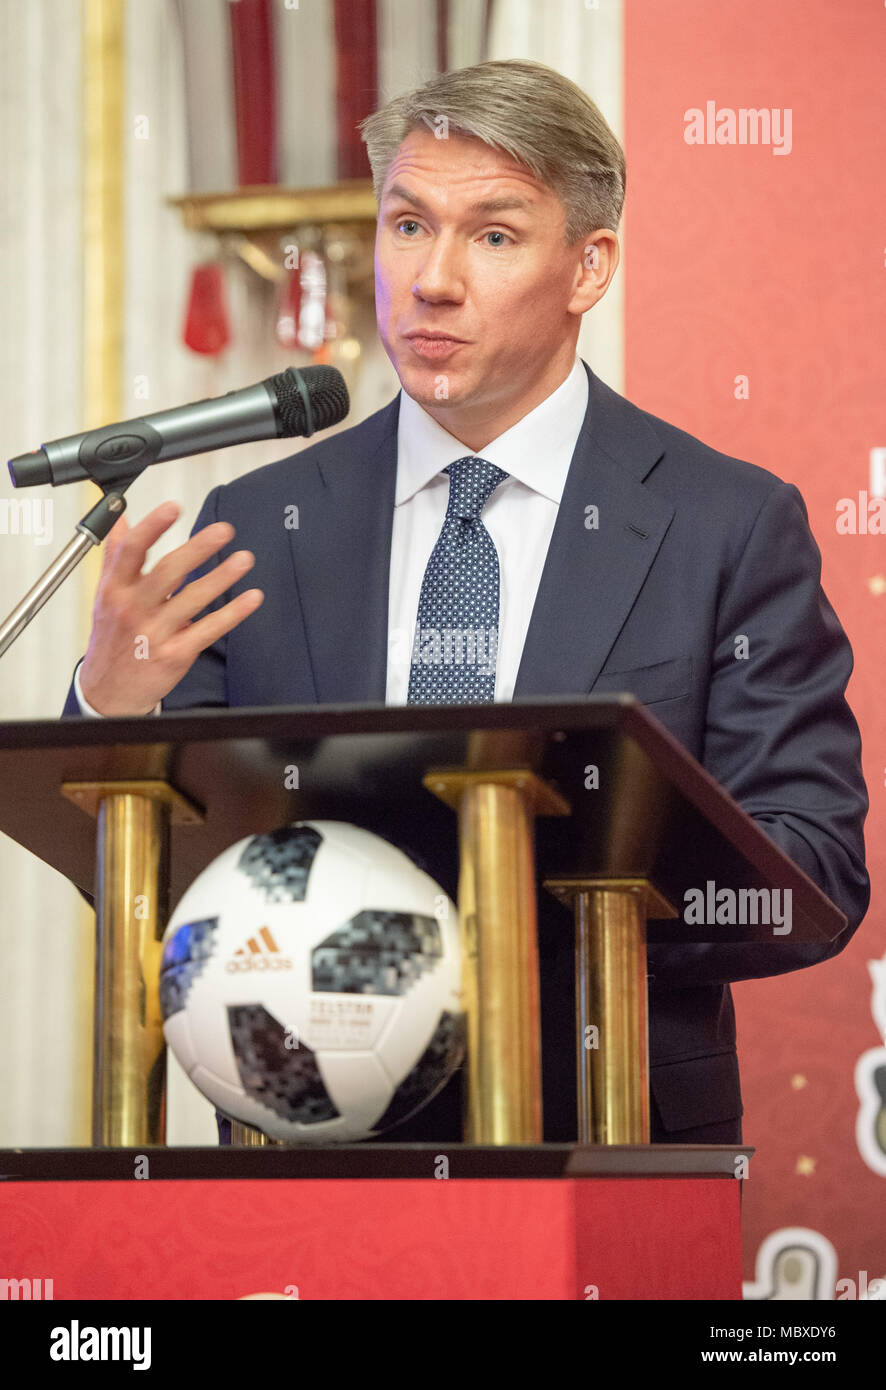 11 April 2018, Germany, Berlin: Alexey Sorokin, chairman of the organisational committee of the FIFA World Cup in Russia 2018, speaks at the concept presentation for the Football World Cup 2018 at the Russian Embassy. Photo: Christophe Gateau/dpa Stock Photo